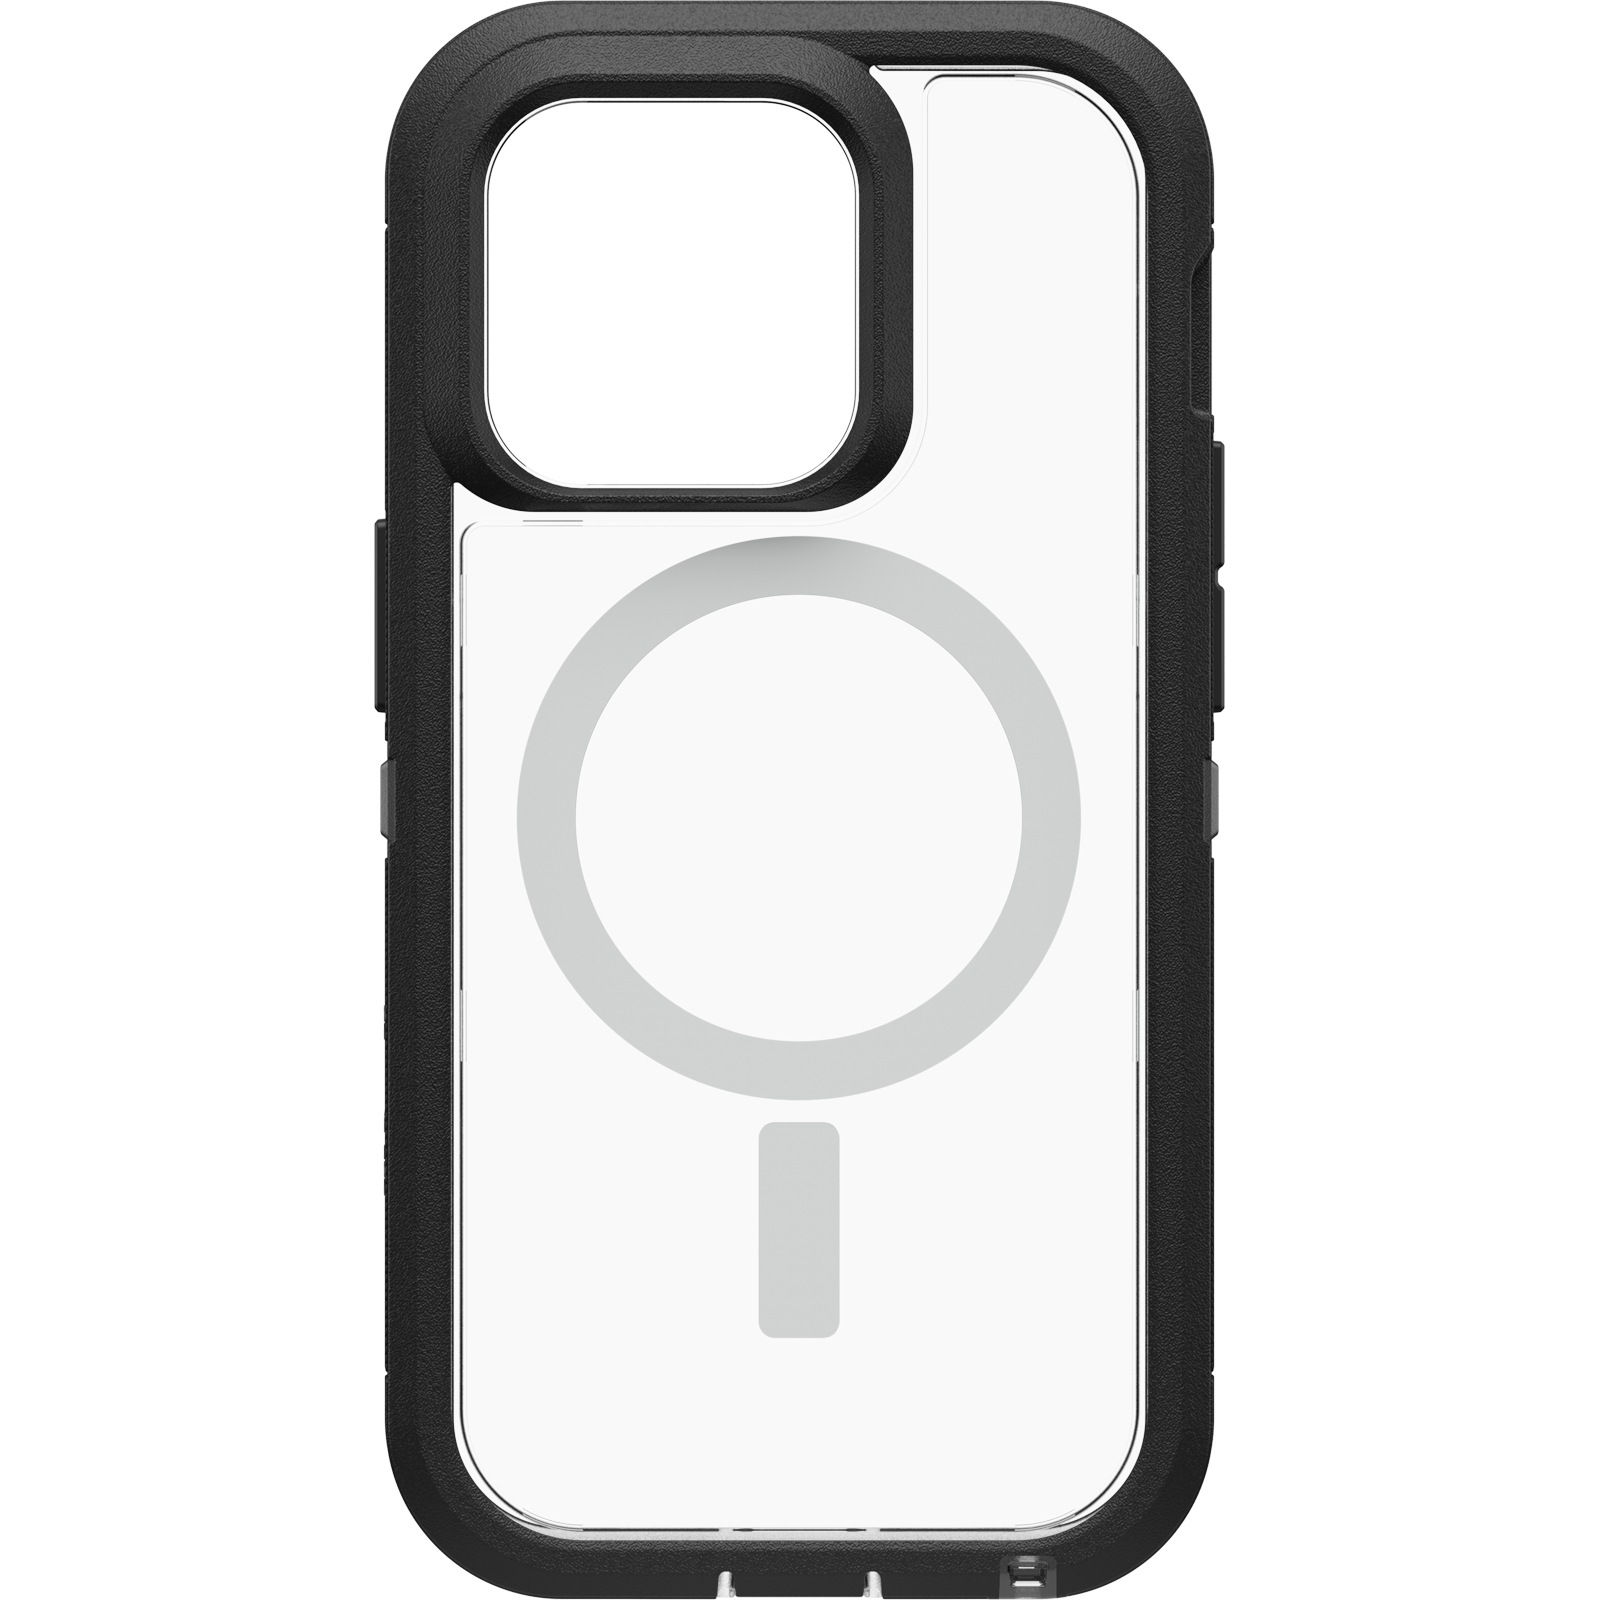 Otterbox Backcover »Defender XT - iPhone 14 Pro«